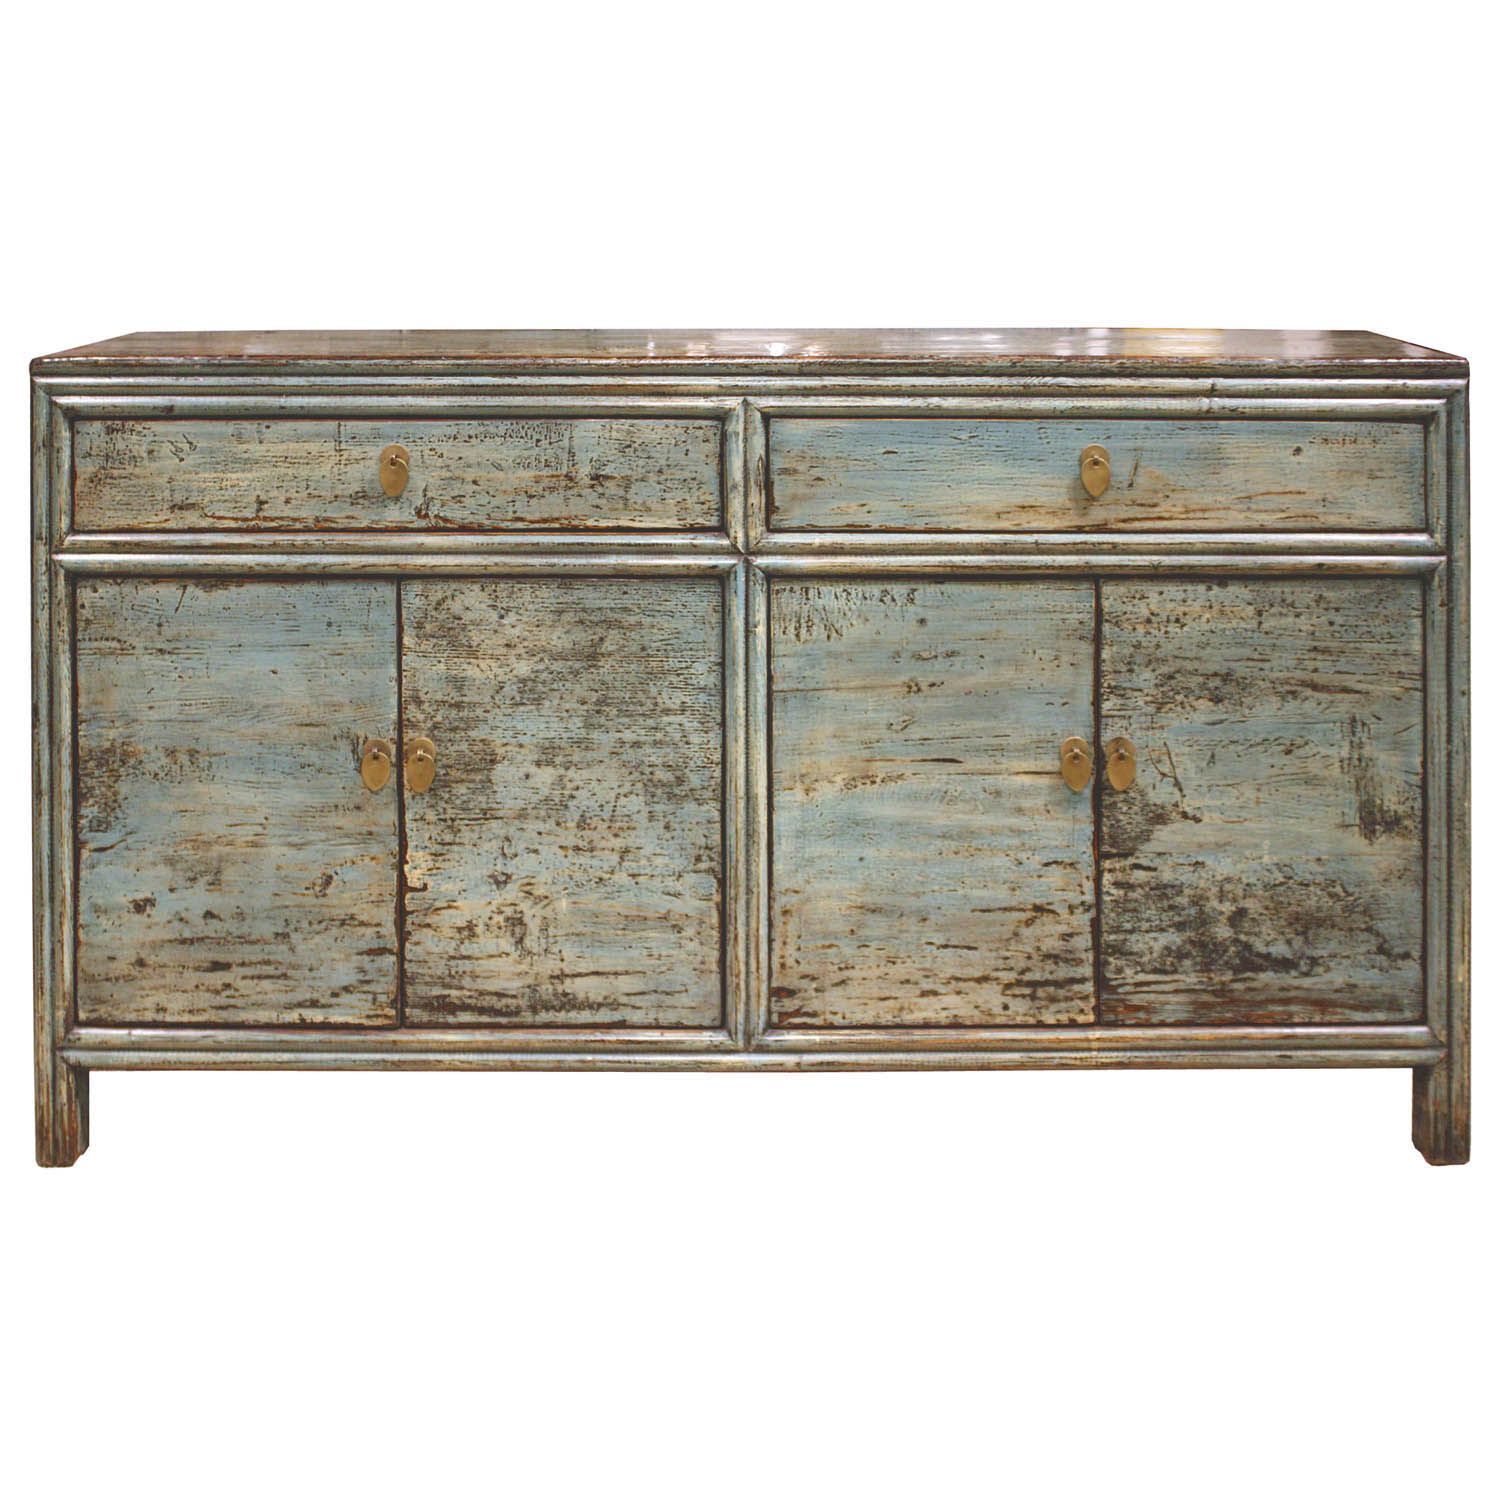 Blue/green Sideboard | Buffets And Sideboards | Sideboard Inside Most Popular Rutledge Sideboards (View 18 of 20)